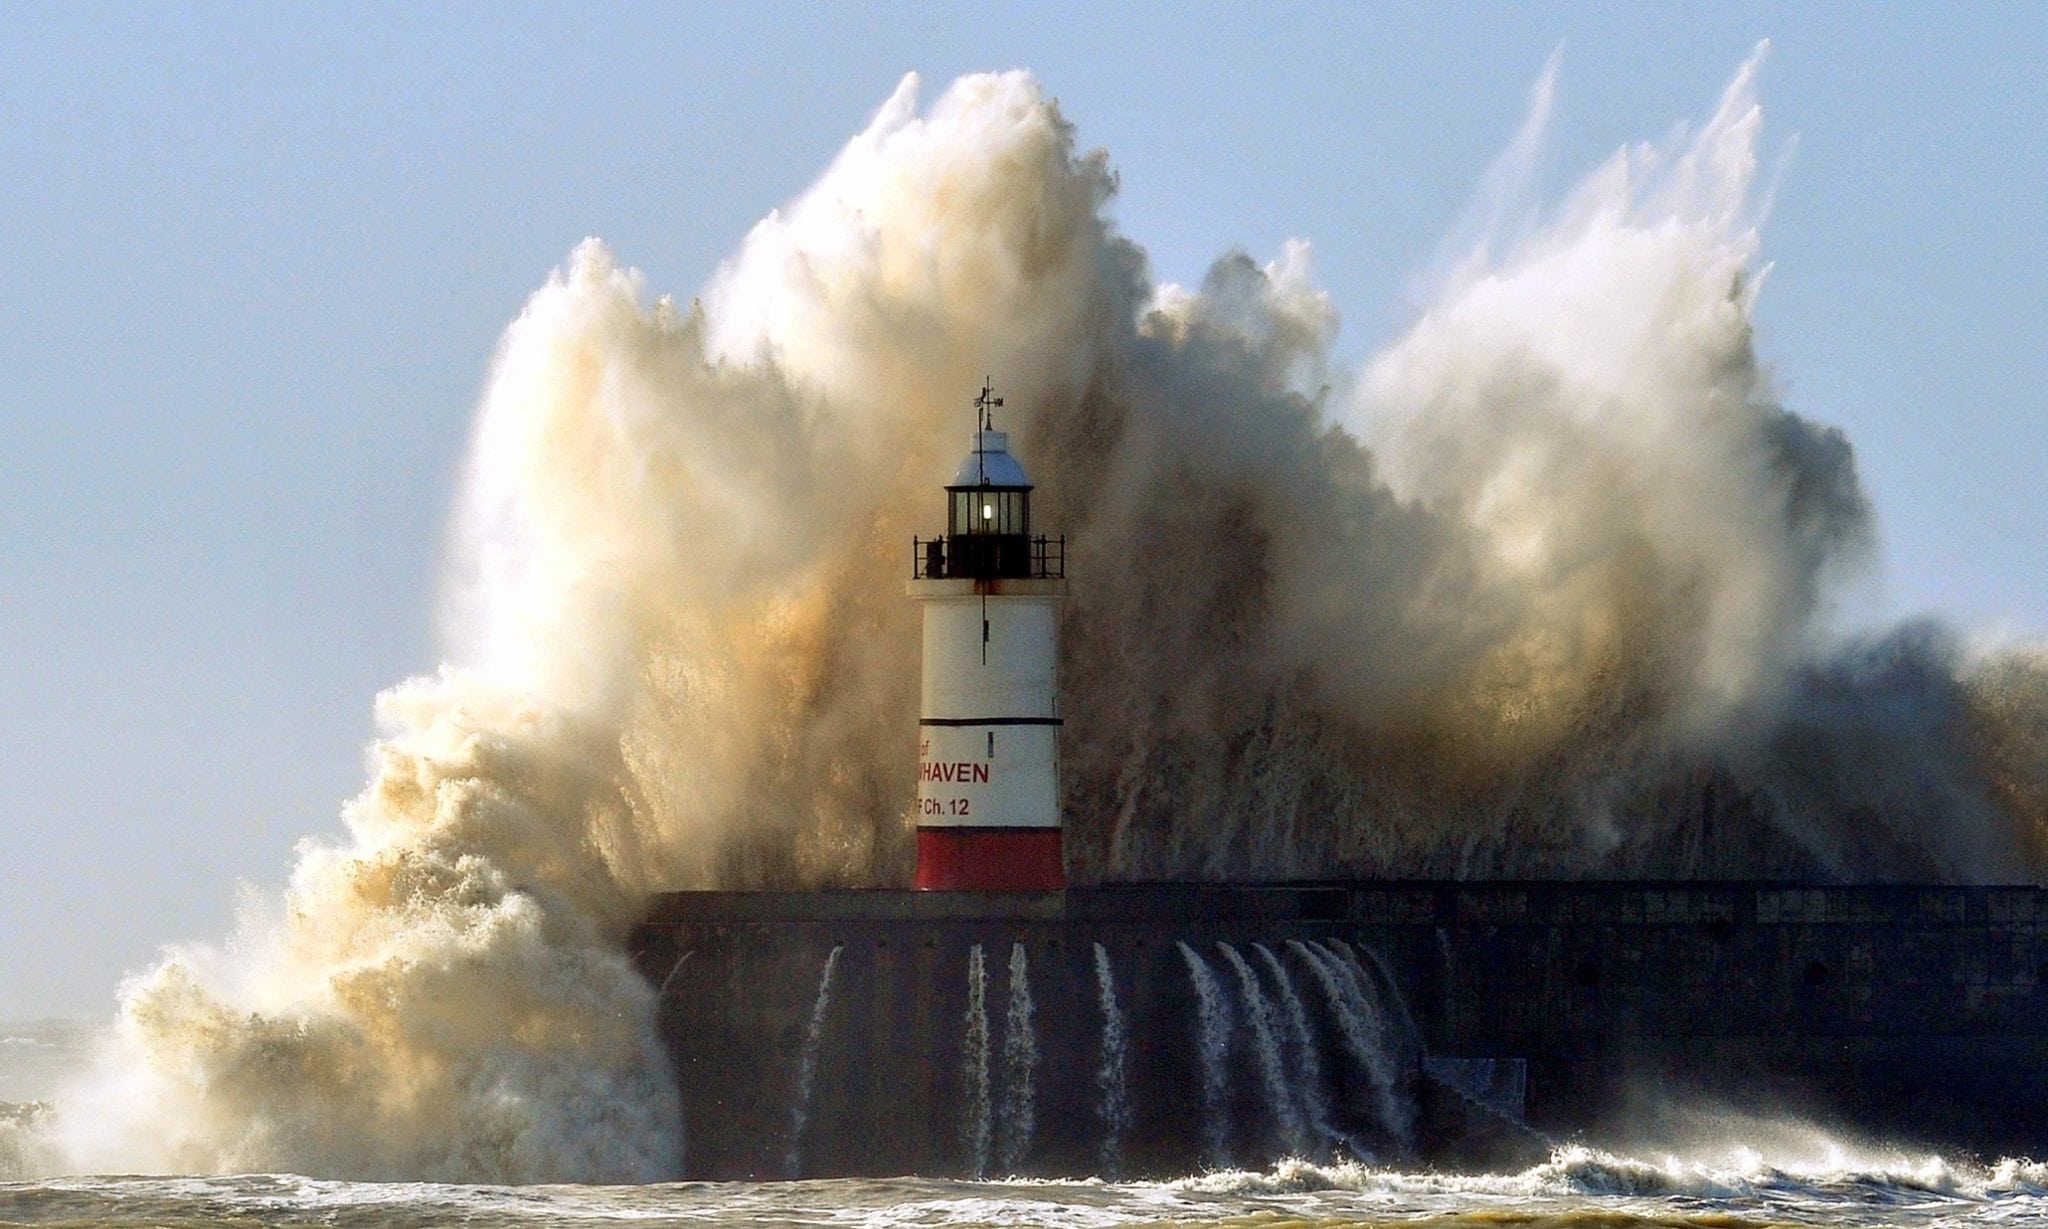 Newhaven lighthouse is battered by waves as high winds from the latest winter storm, south coast of England, February 15, 2014.